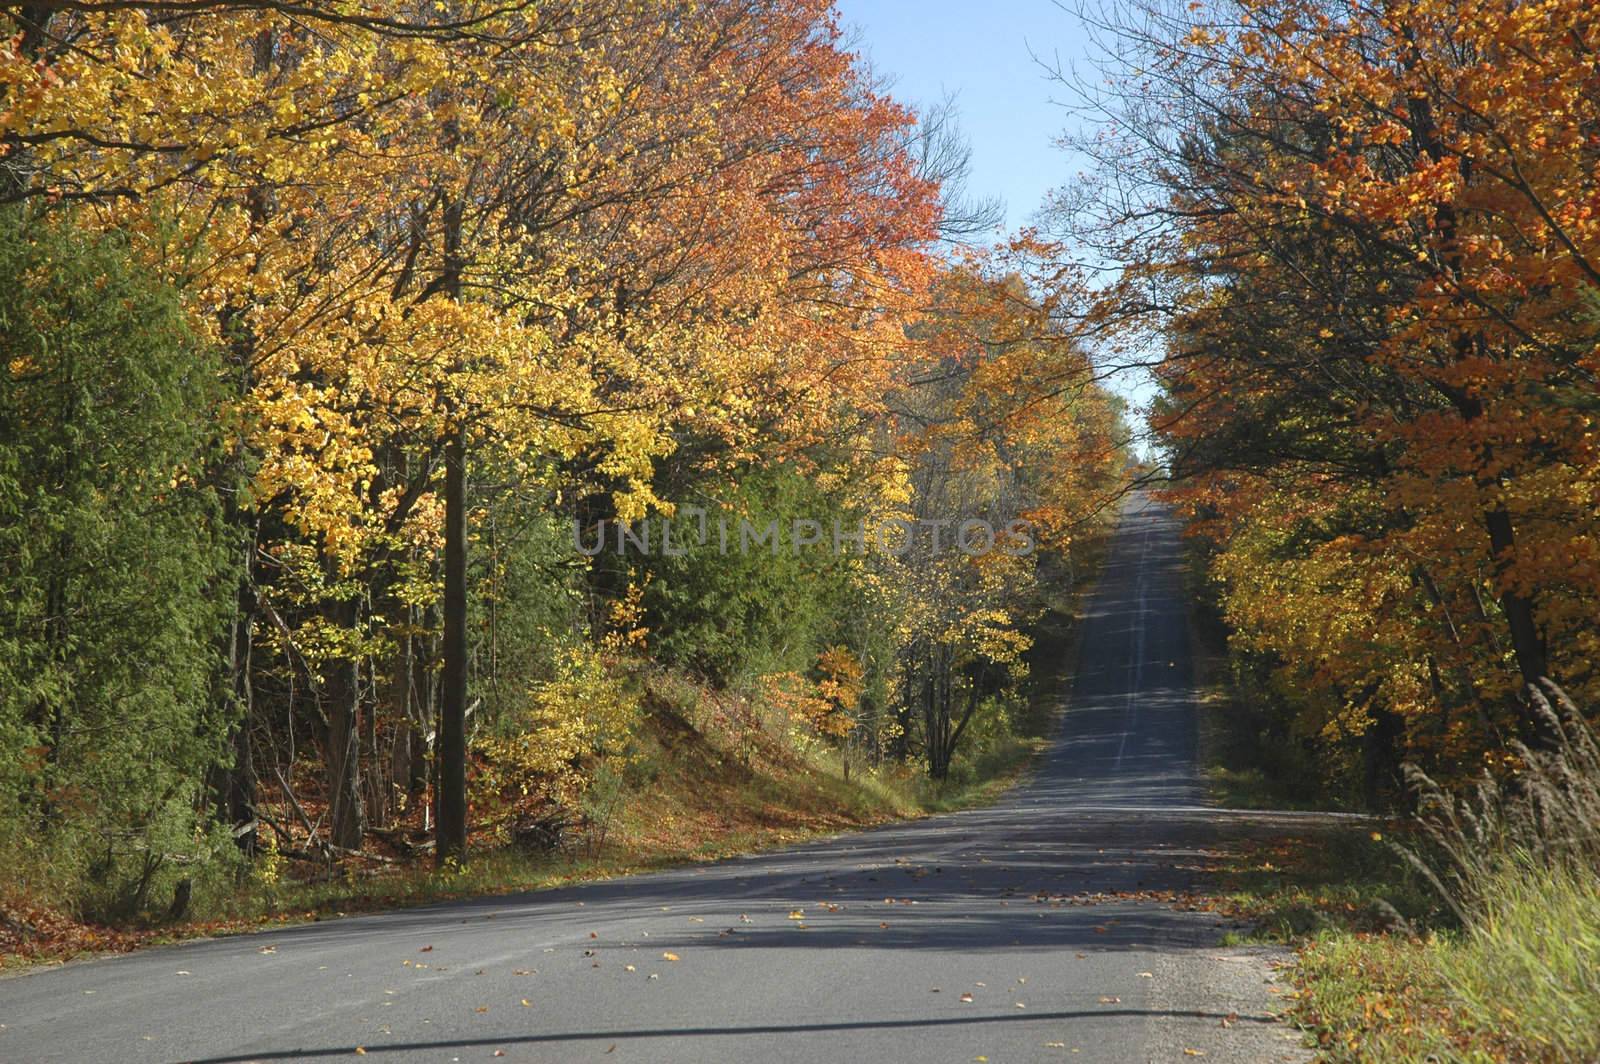 Country road flanked with colorful autumn foliage.